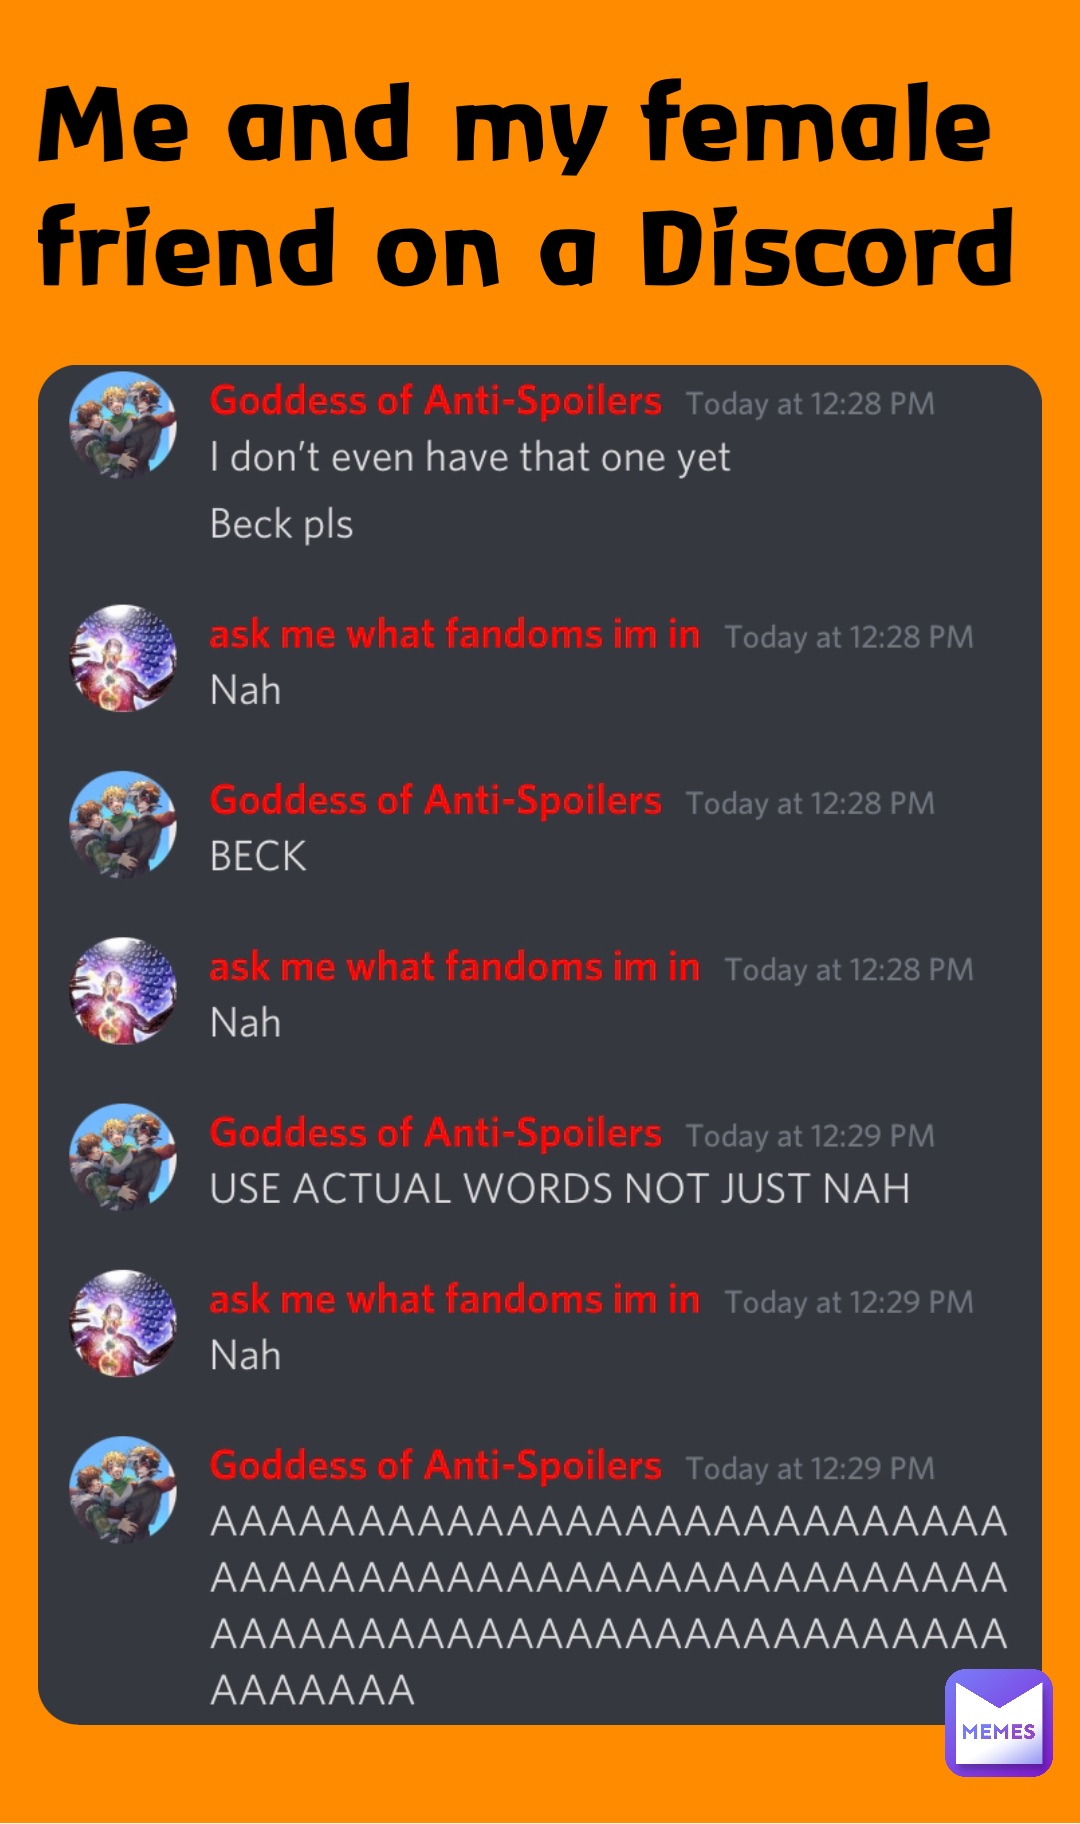 Me and my female friend on a Discord